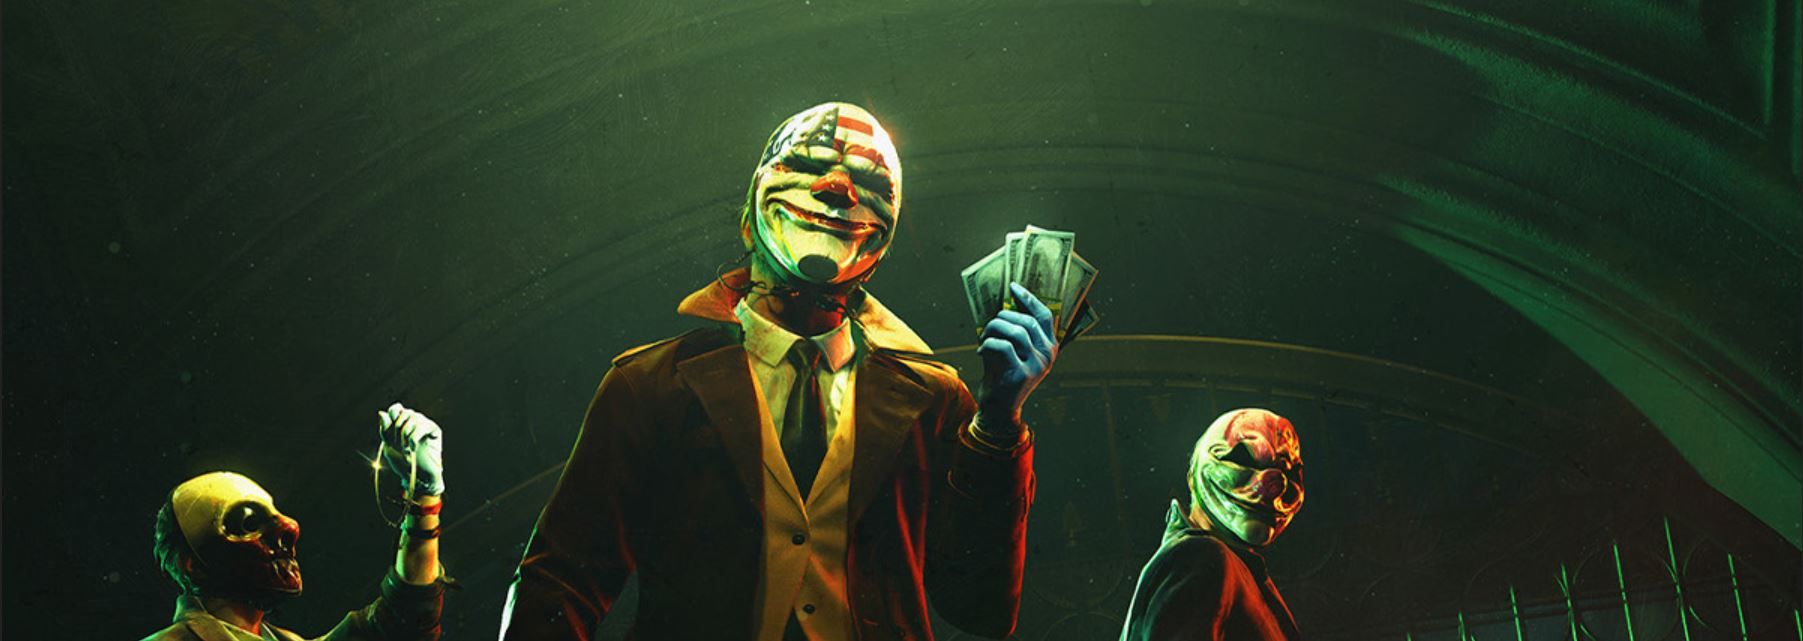 From Bumbling Stealth to Tactical Shooting: The Payday 3 Experience